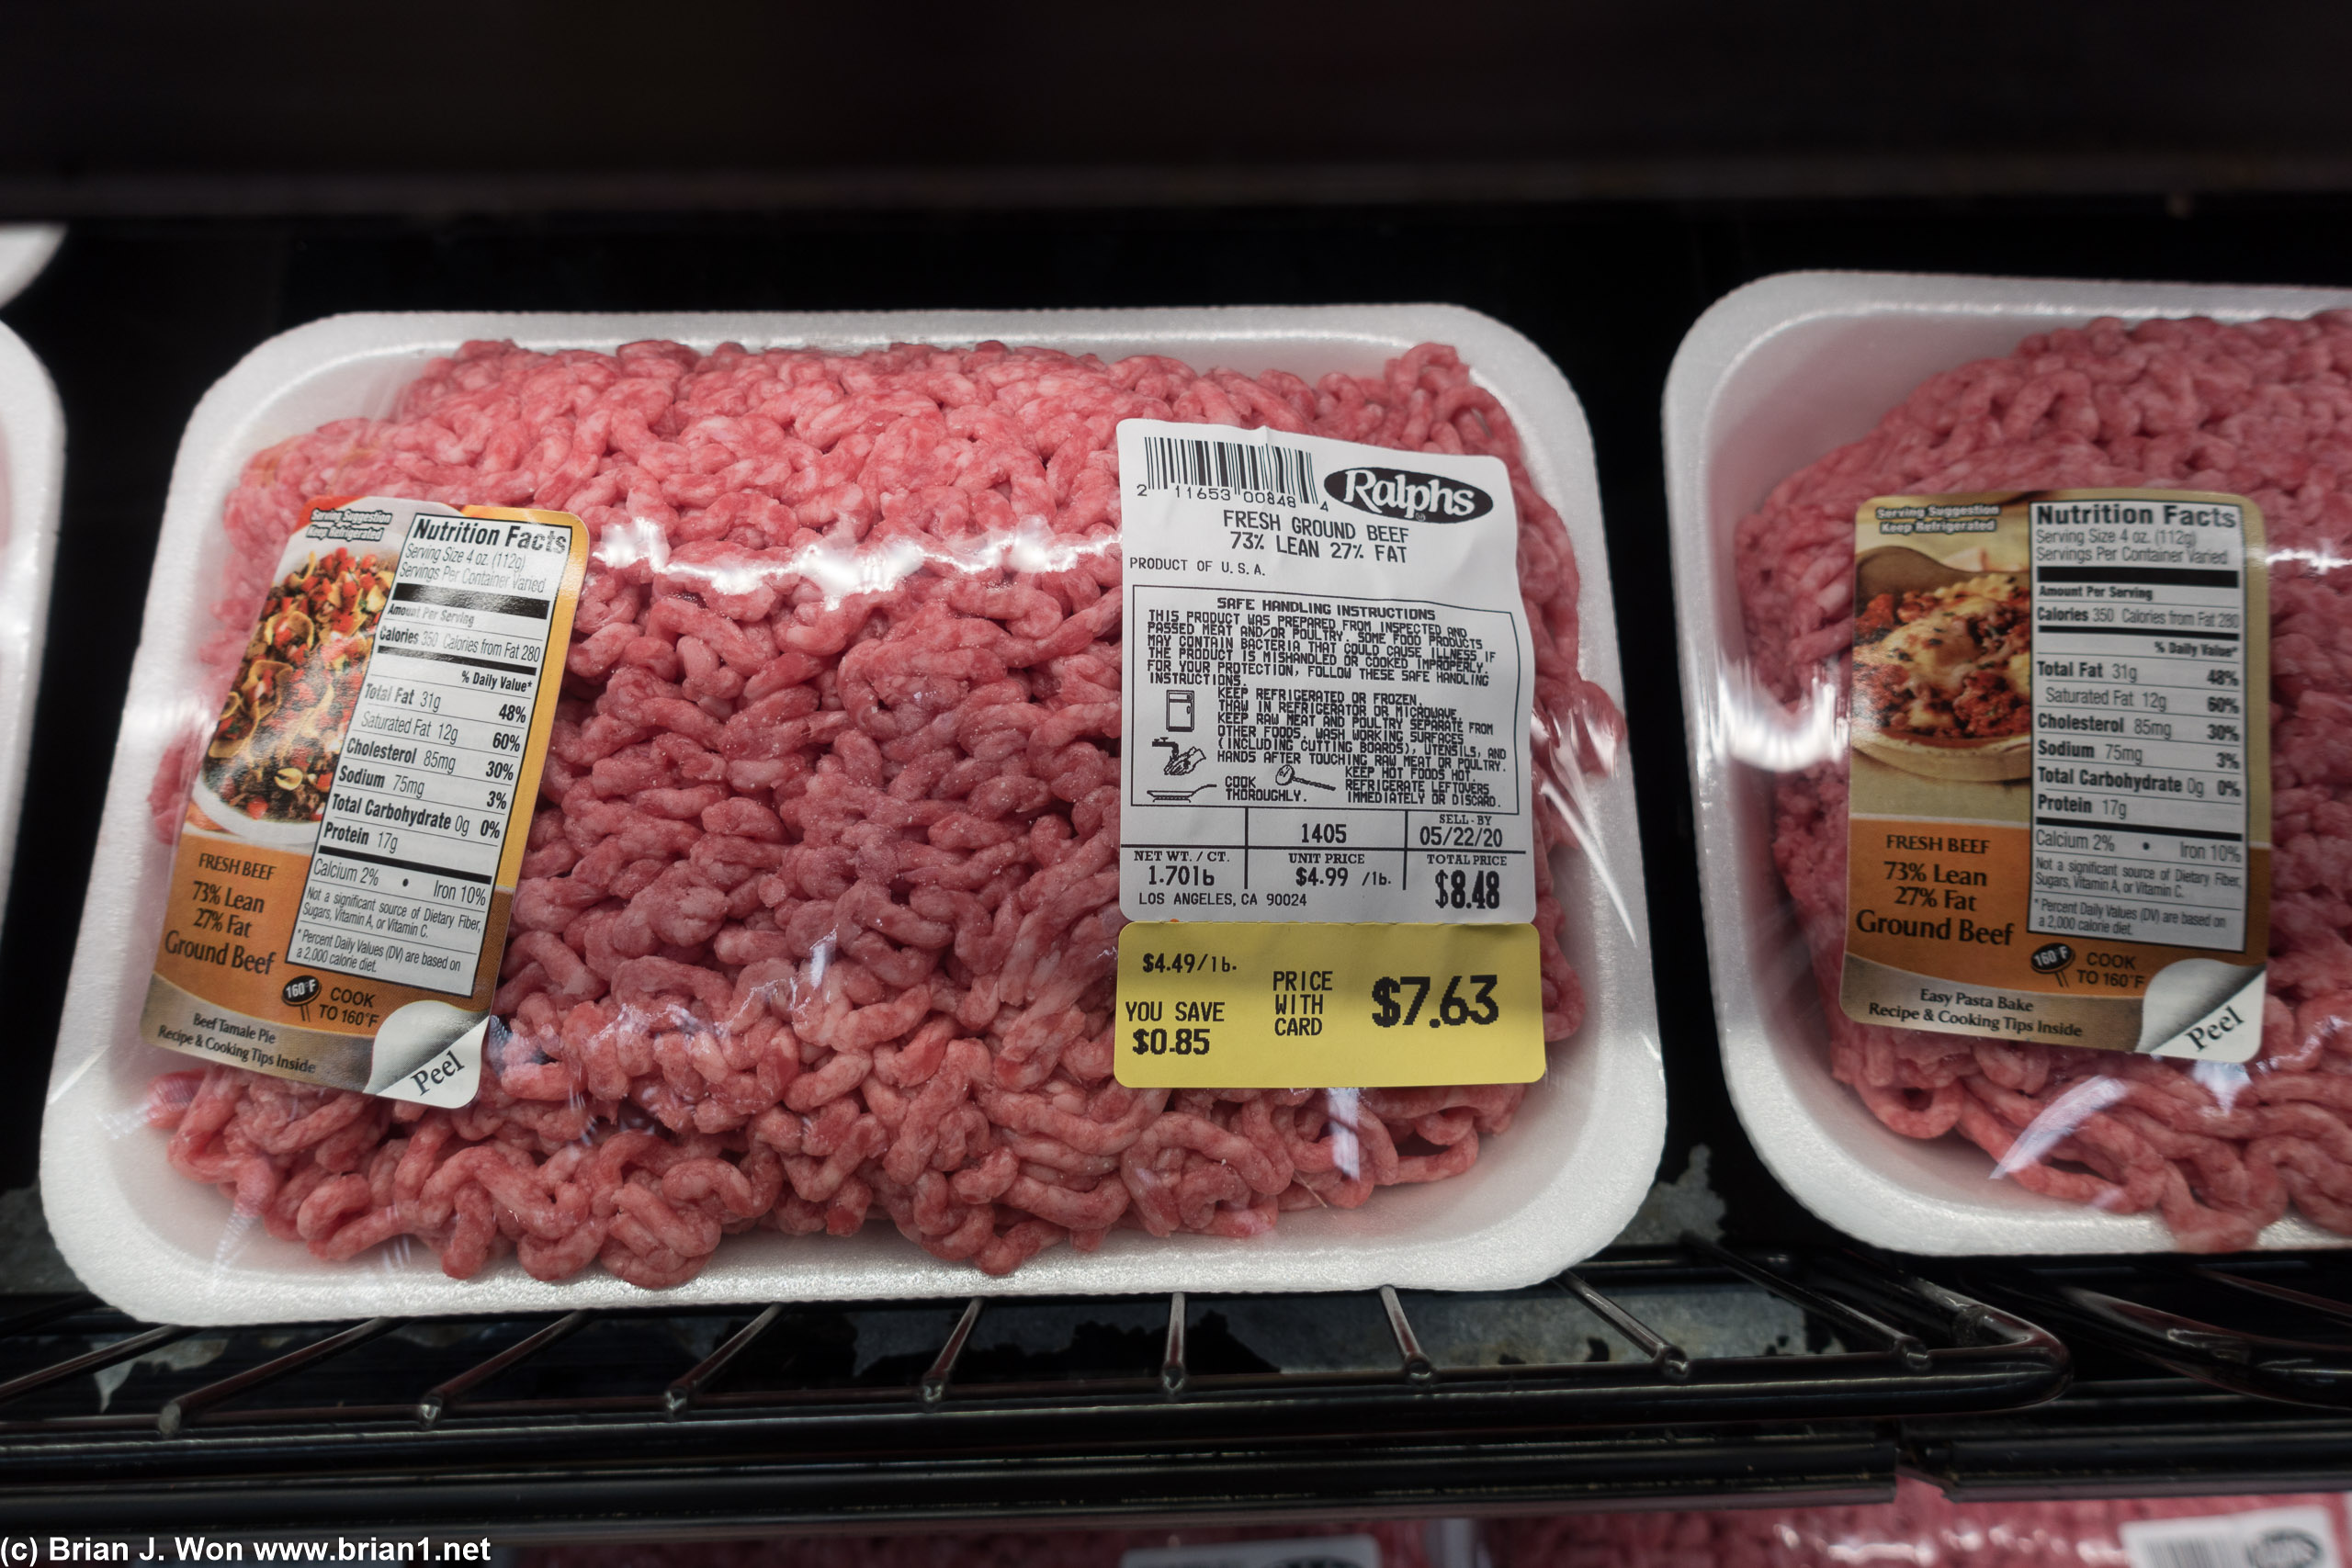 The one thing that's abnormally pricey is ground beef.